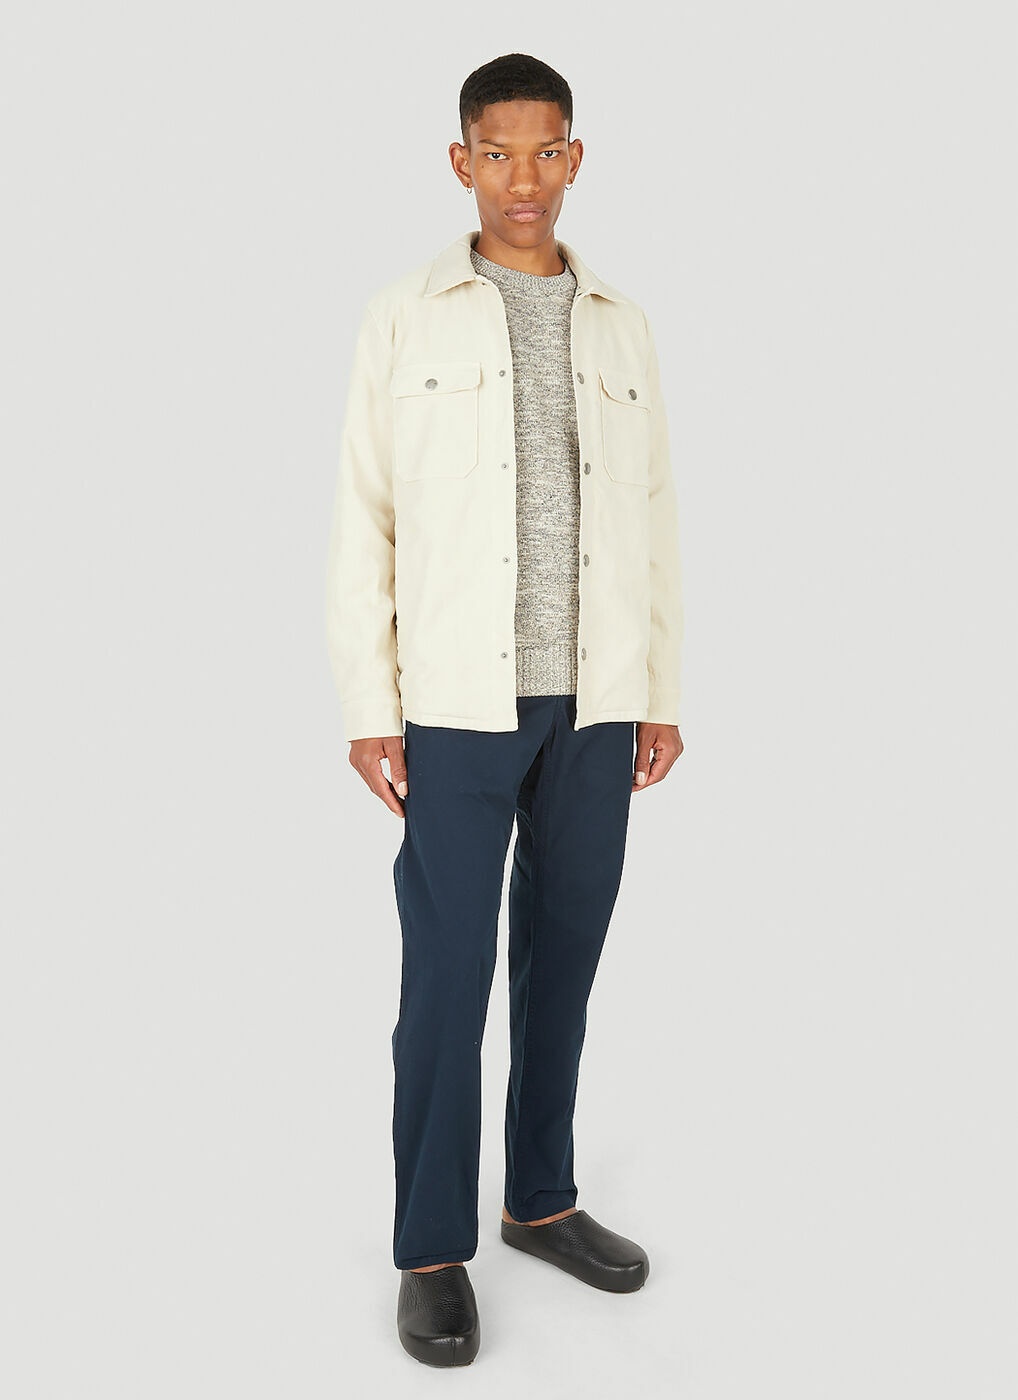 Alex Cord Jacket in White A.P.C.